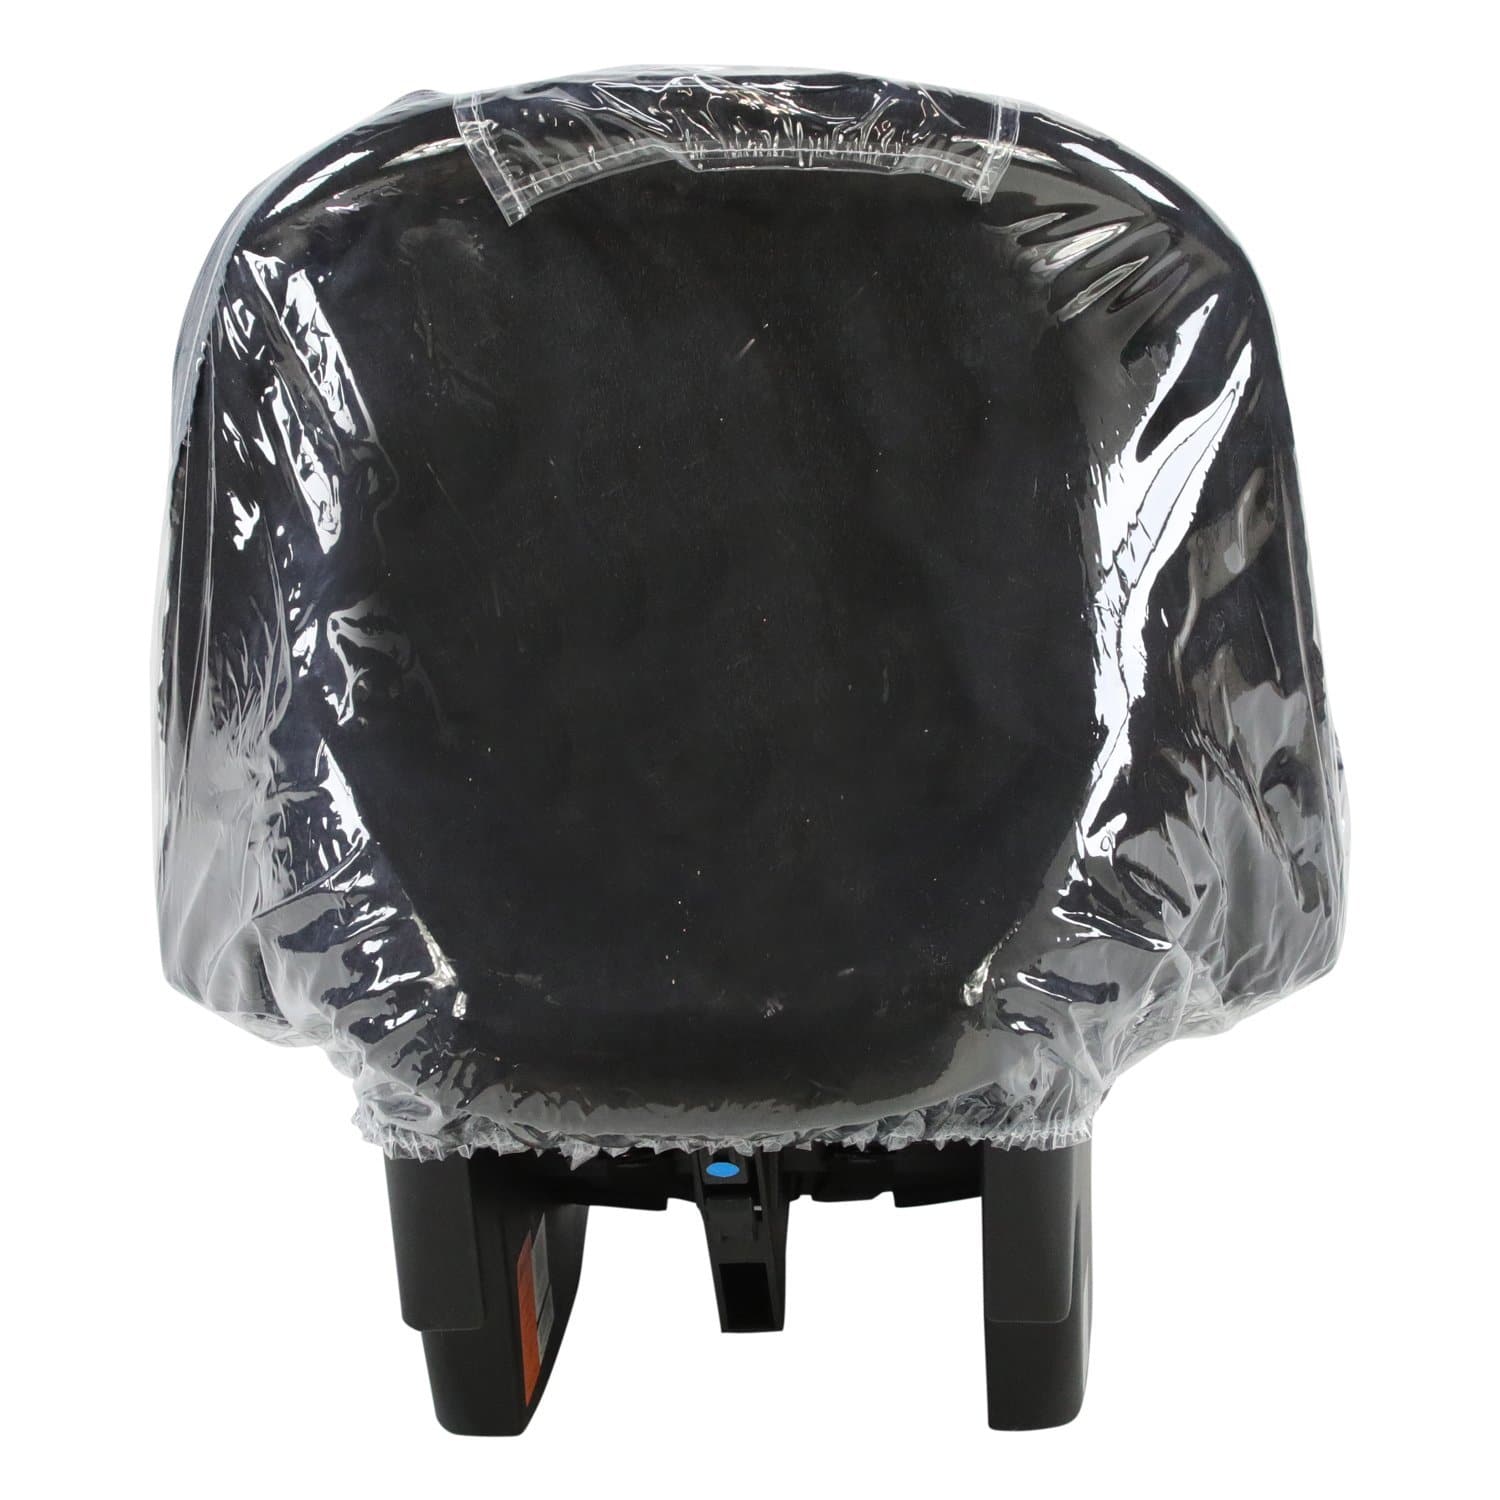 Car Seat Raincover Compatible With Baby Jogger - For Your Little One